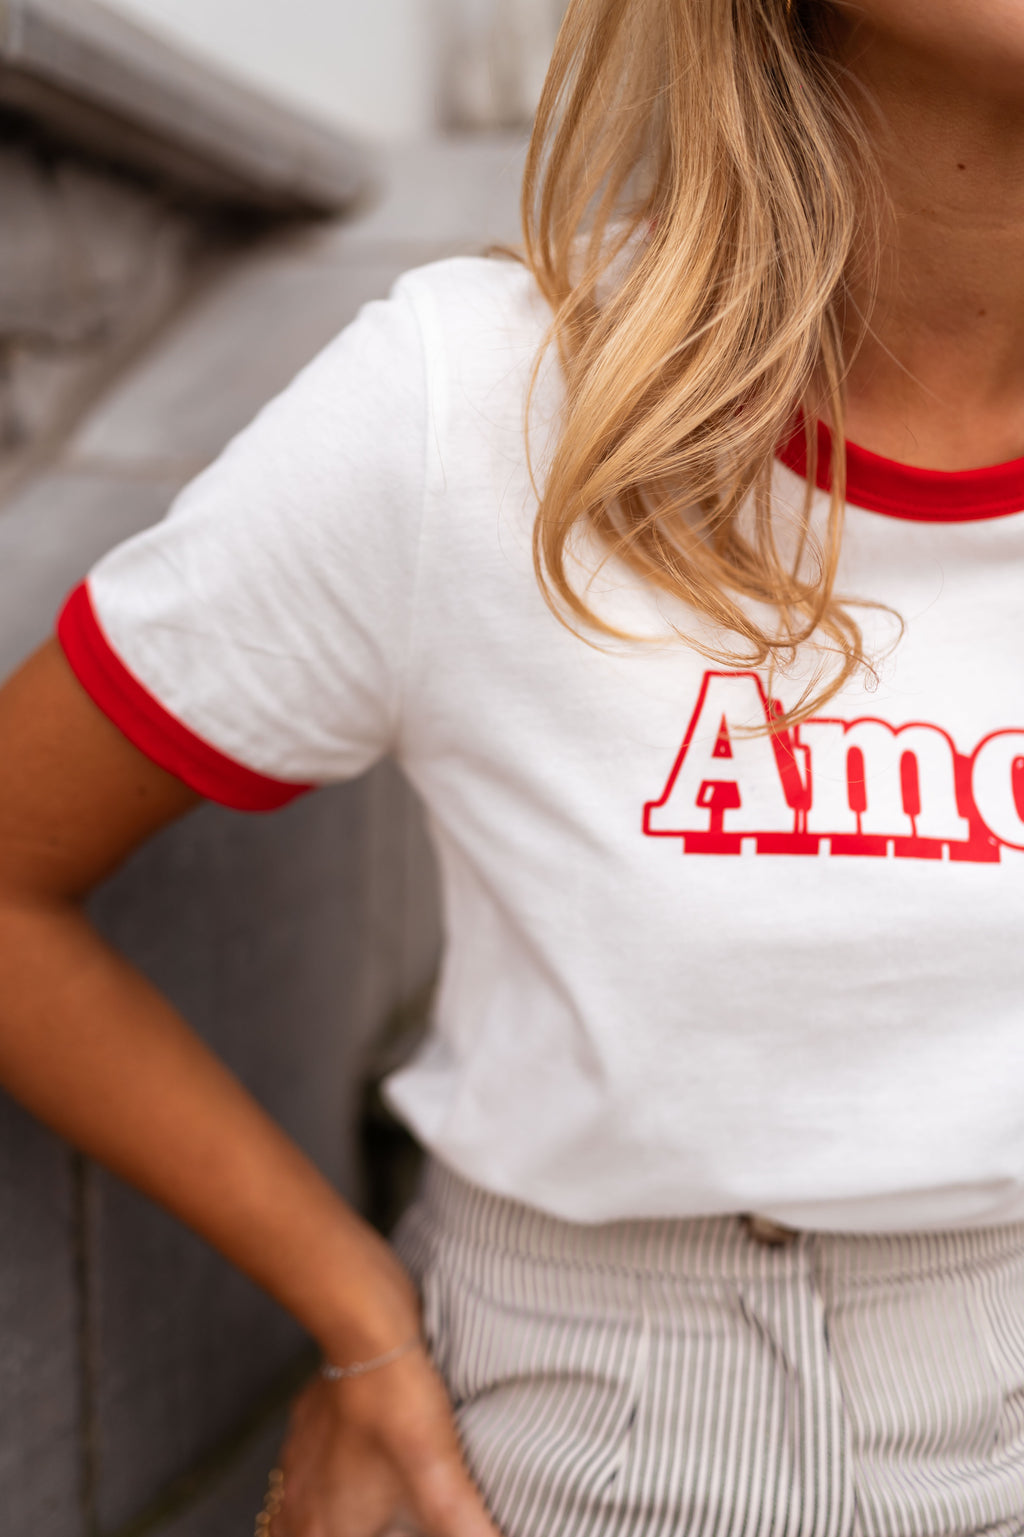 Amor t-shirt - red